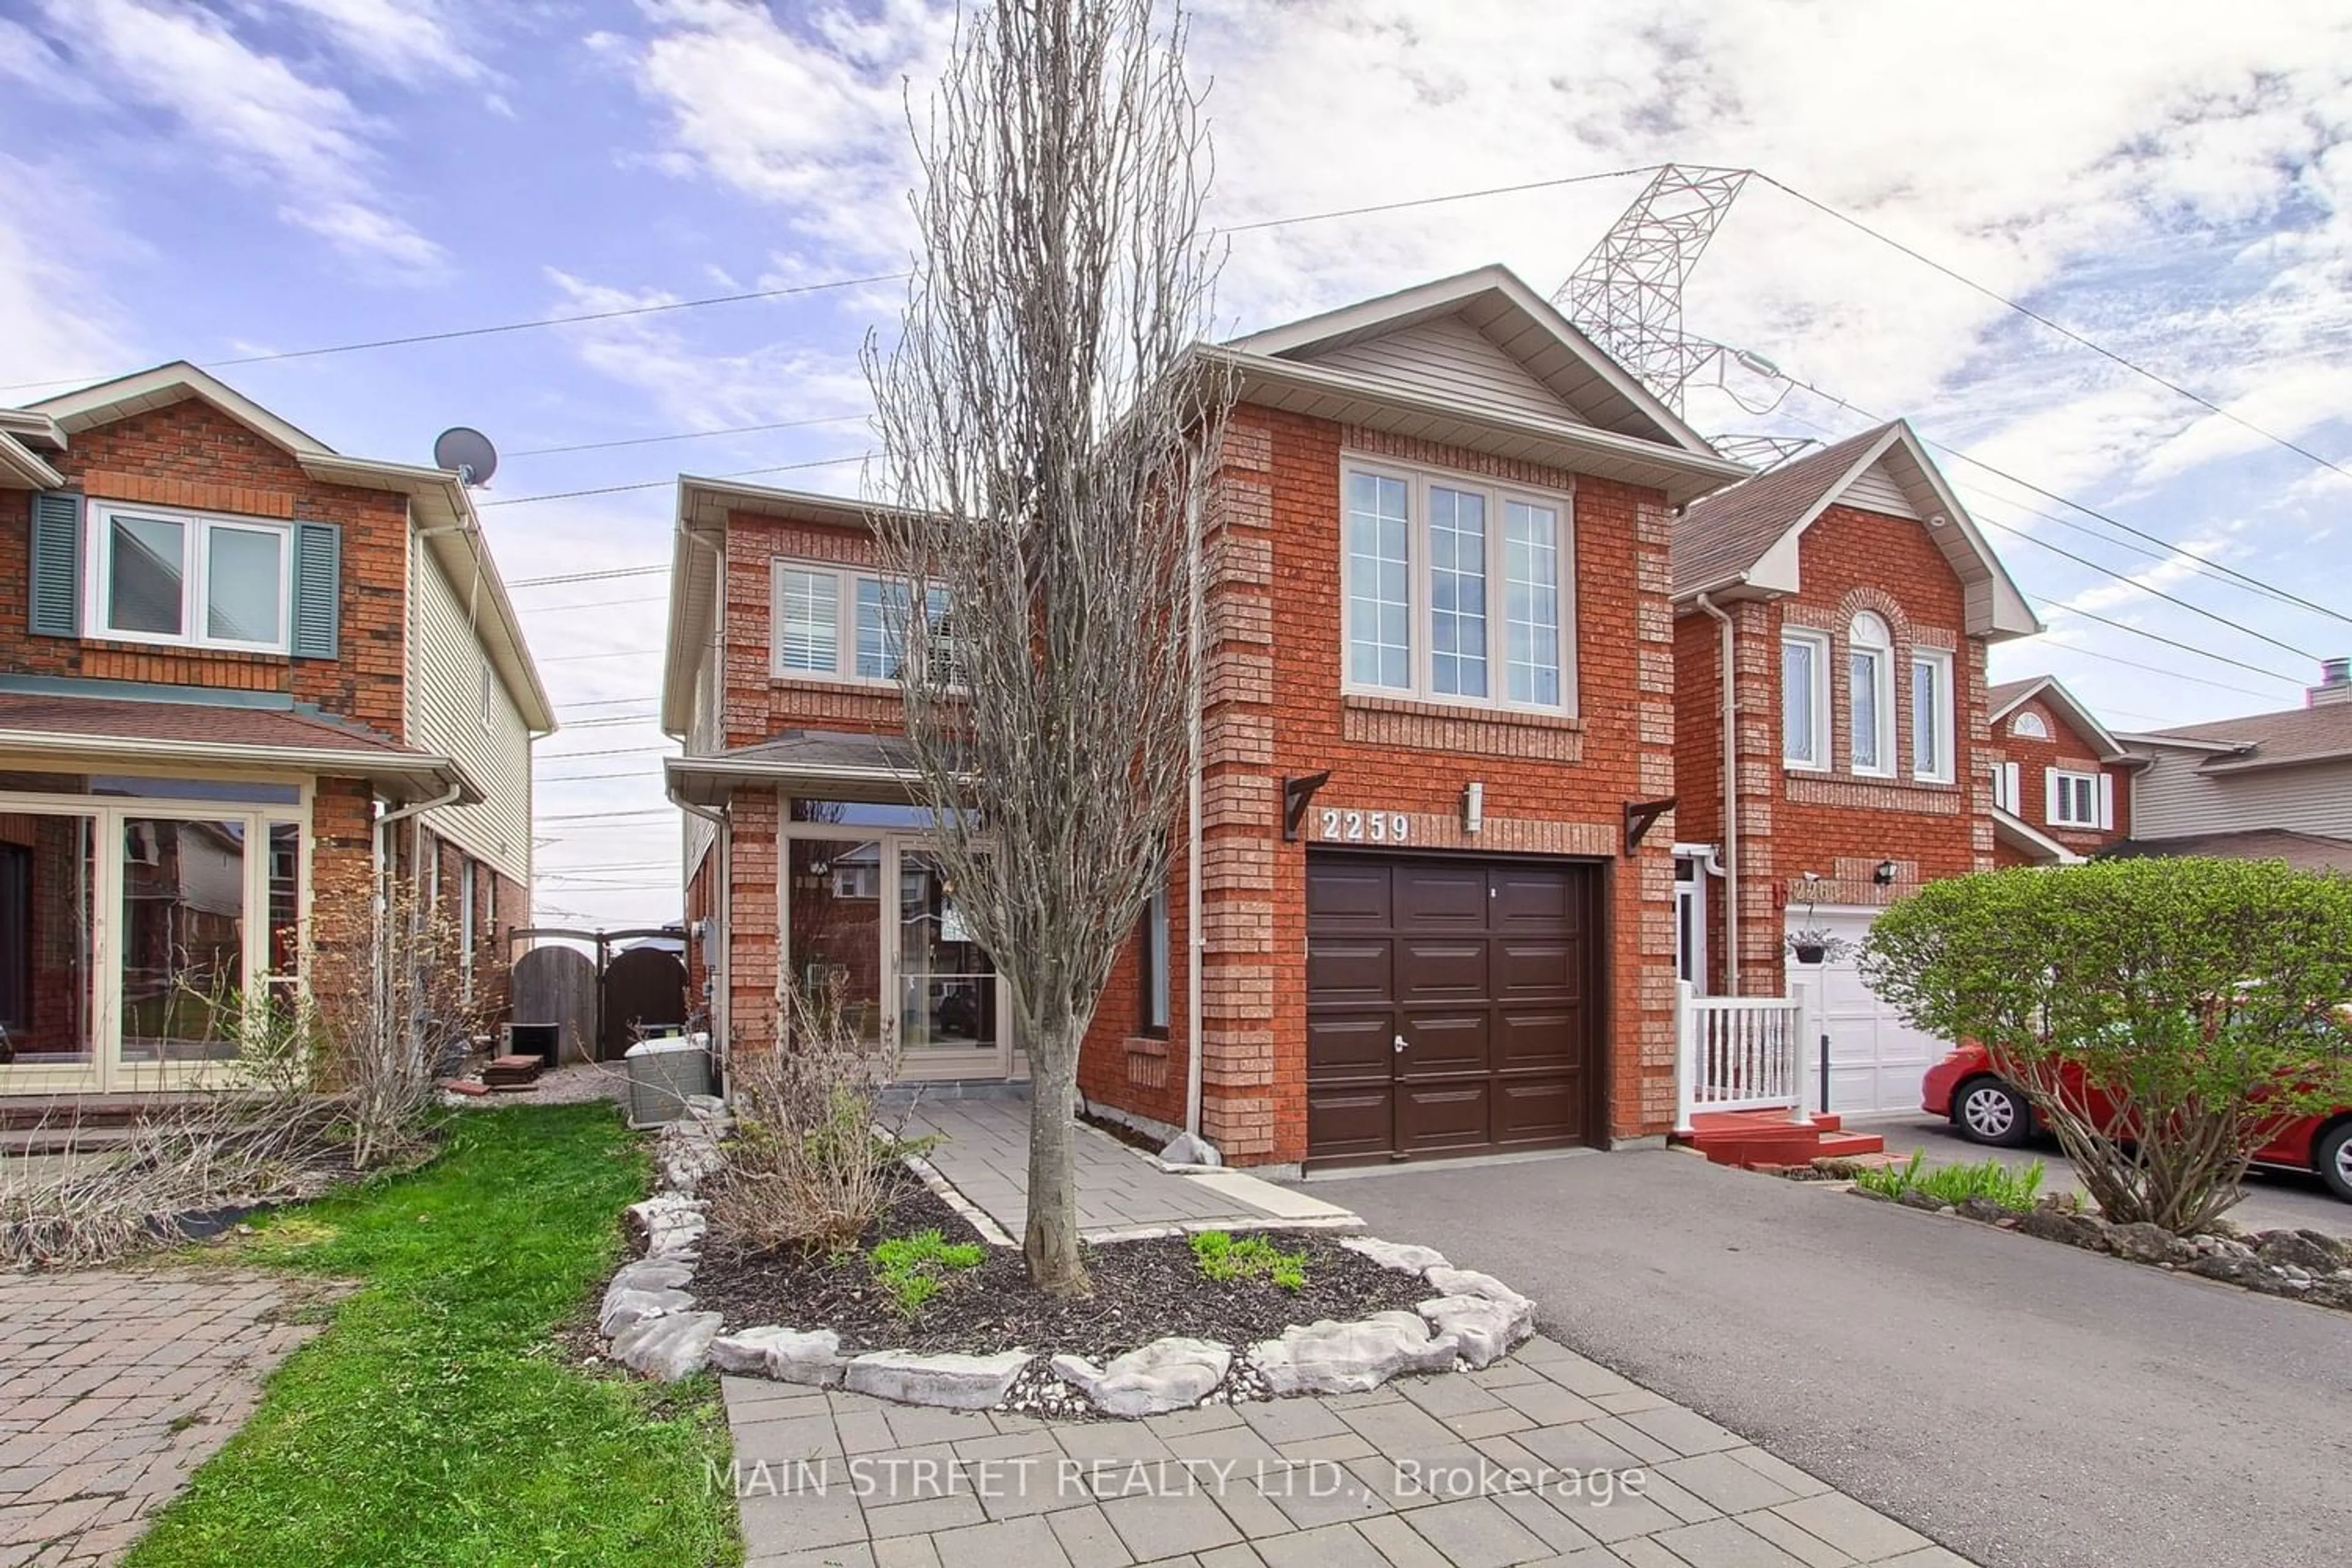 Home with brick exterior material for 2259 Wildwood Cres, Pickering Ontario L1X 2R7